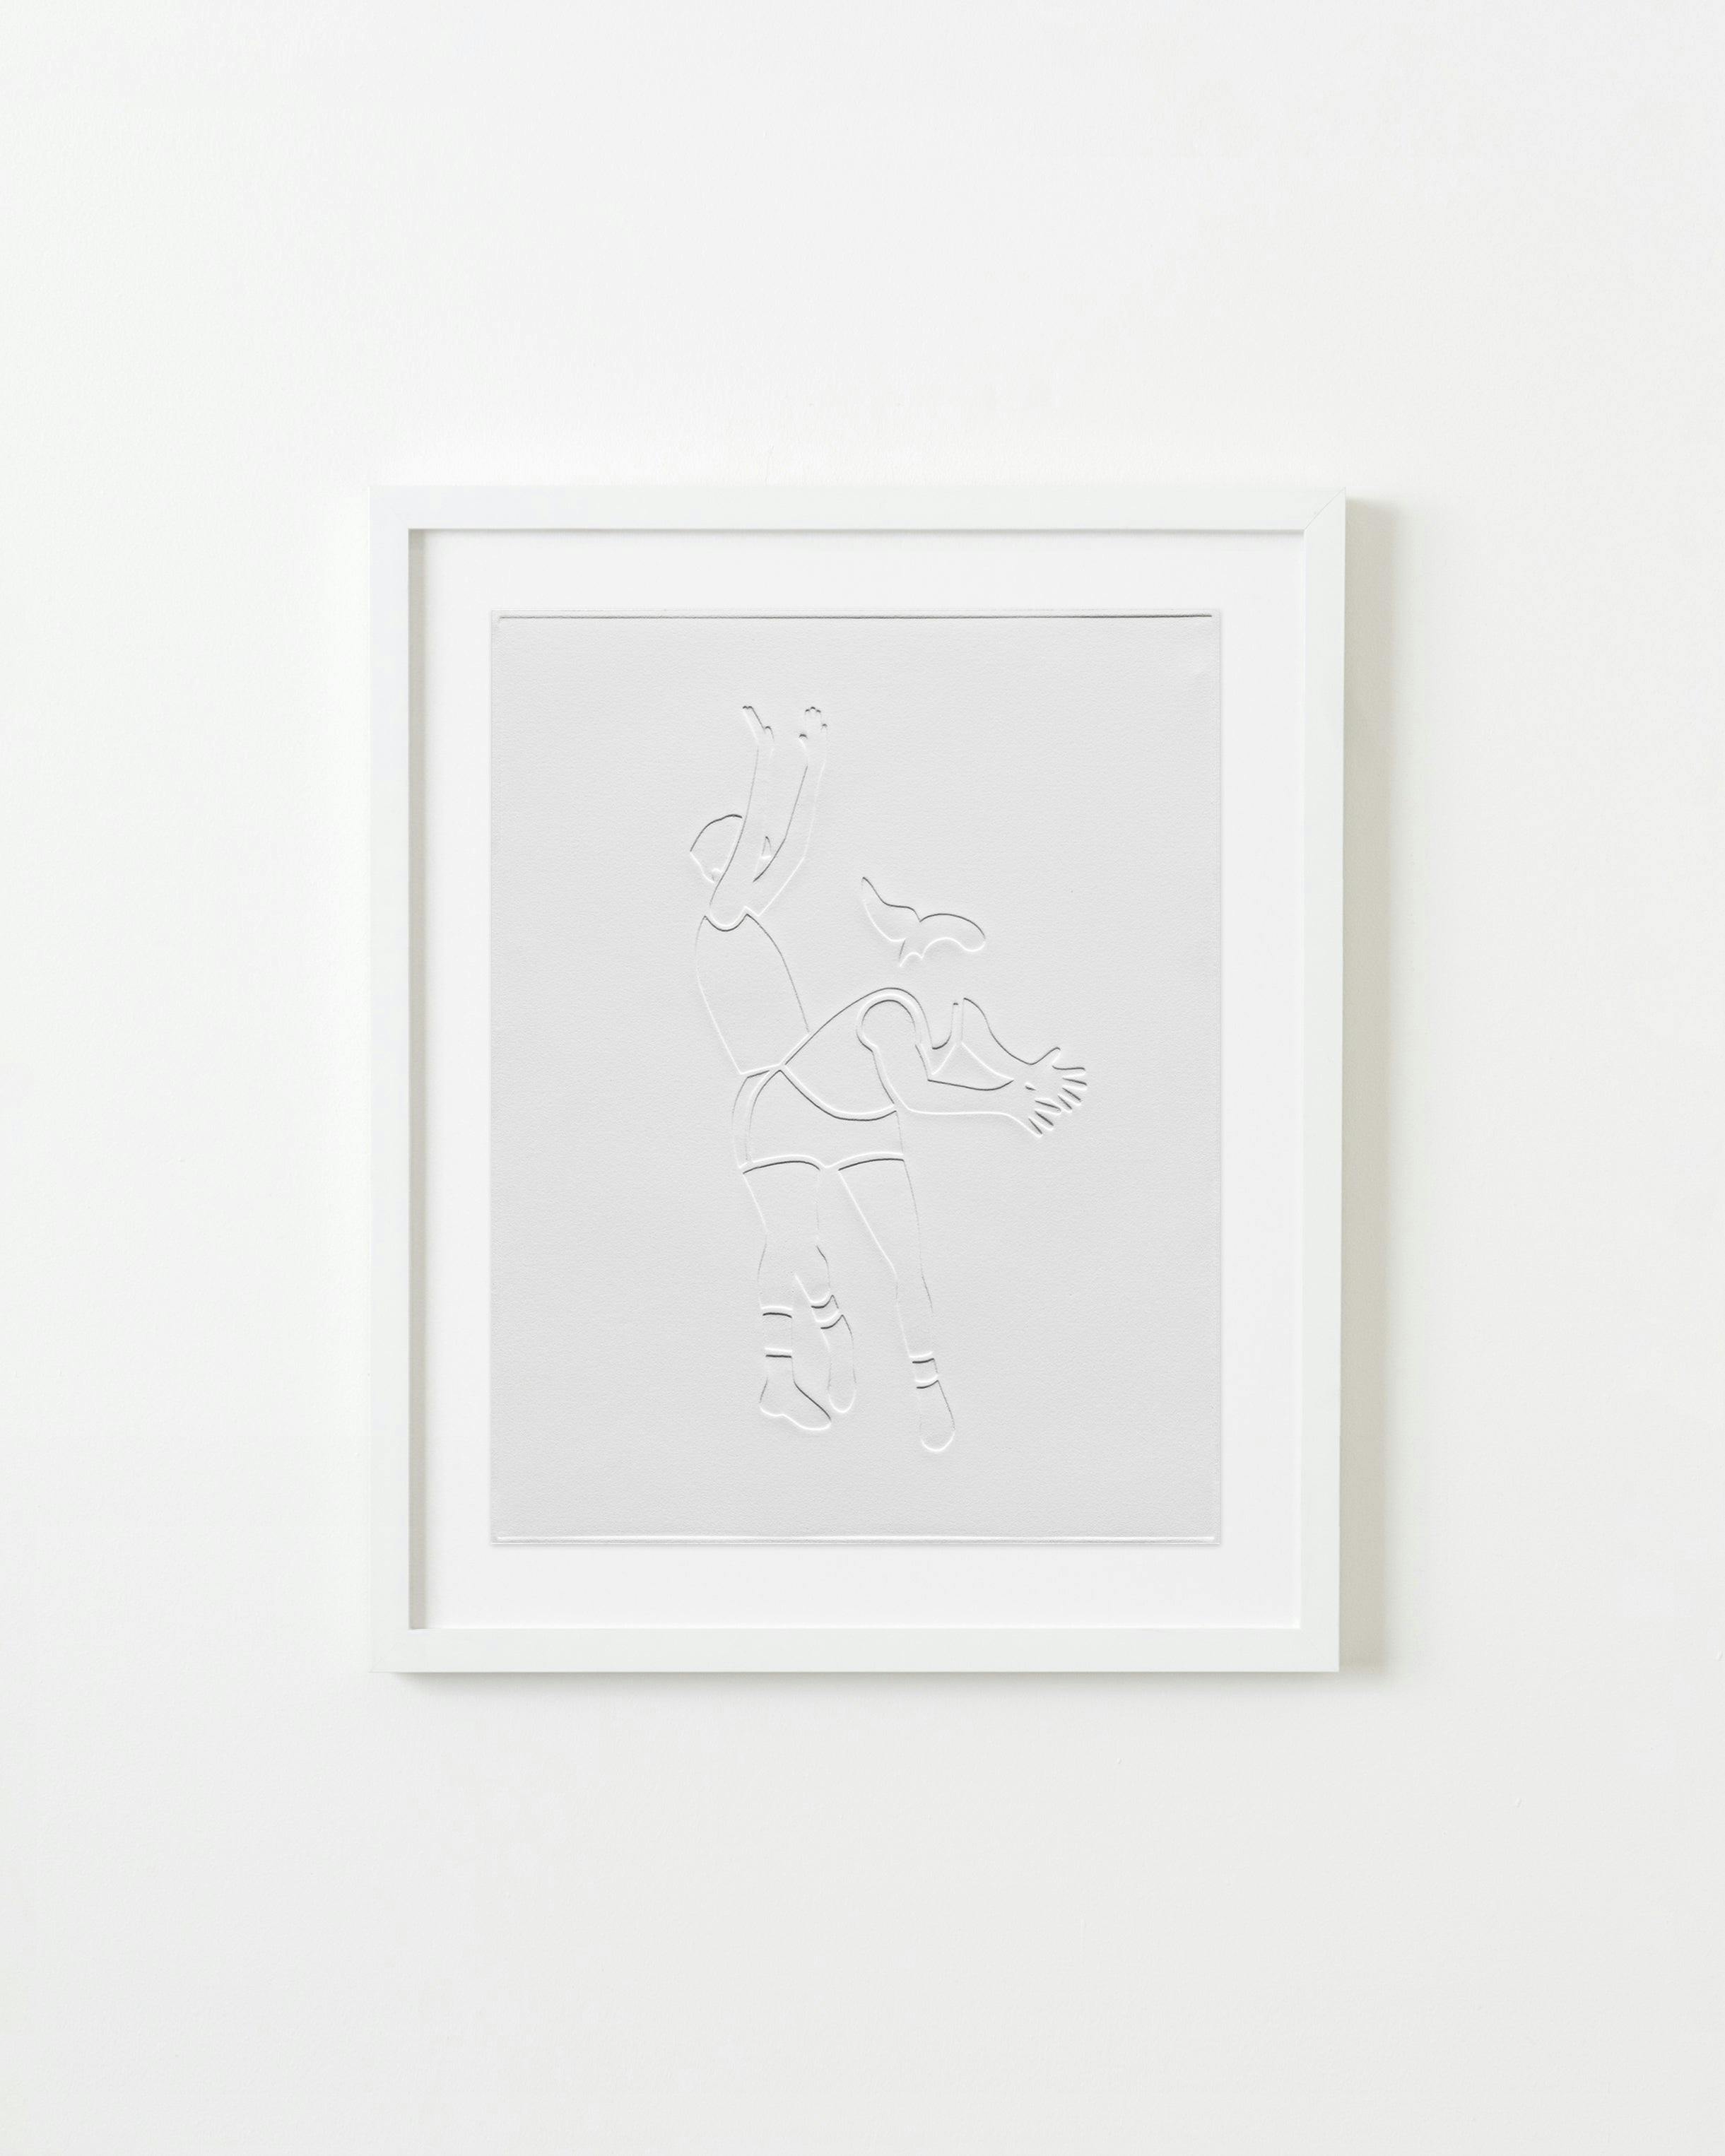 Print by Dana Bell titled "Two Play Basketball".